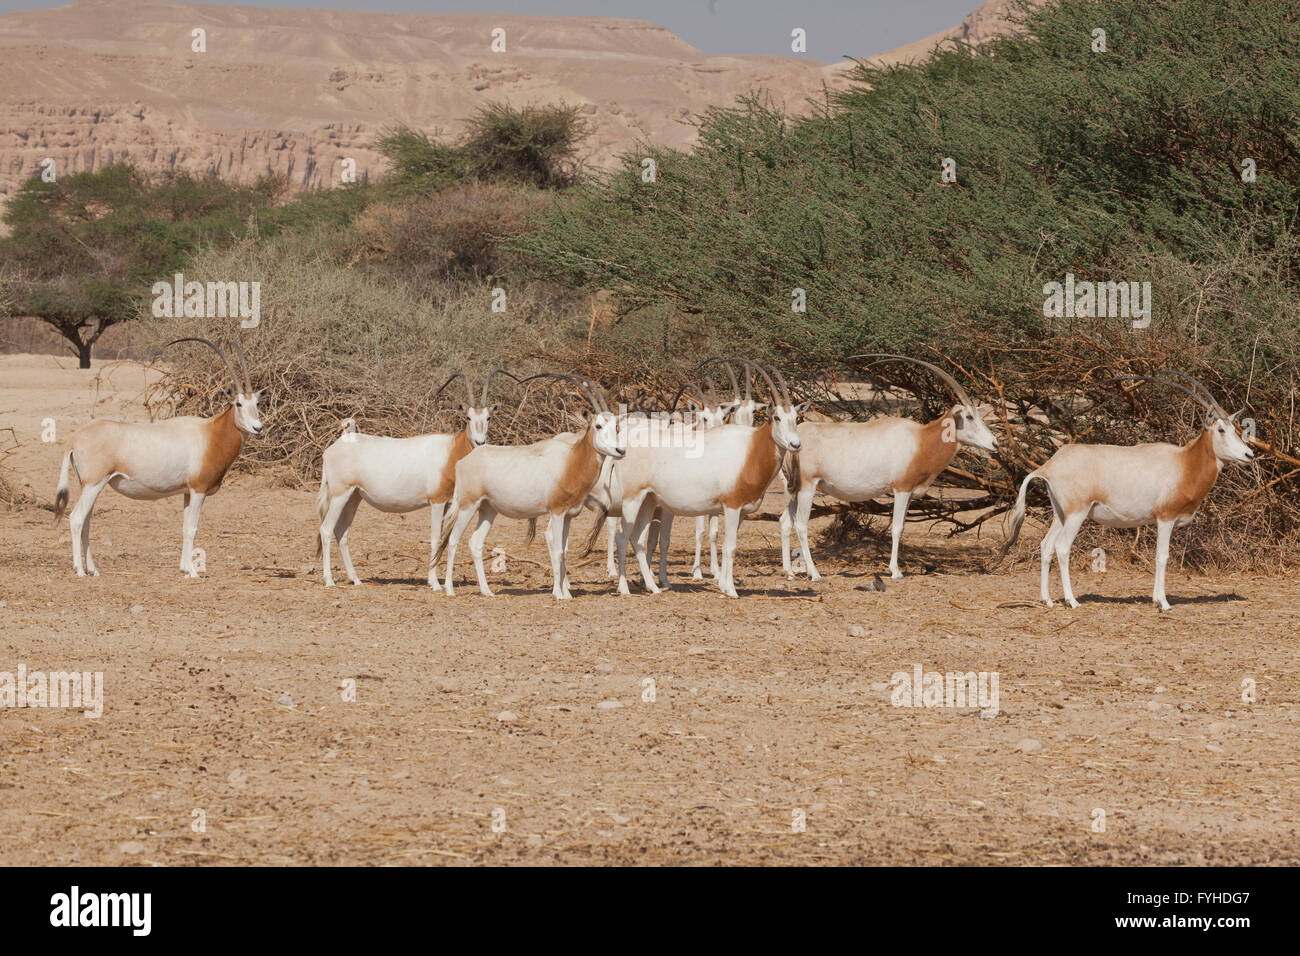 Israel, Aravah desert, A Herd of Scimitar Oryx or Scimitar-horned Oryx (Oryx dammah), also known as the Sahara oryx, is a specie Stock Photo